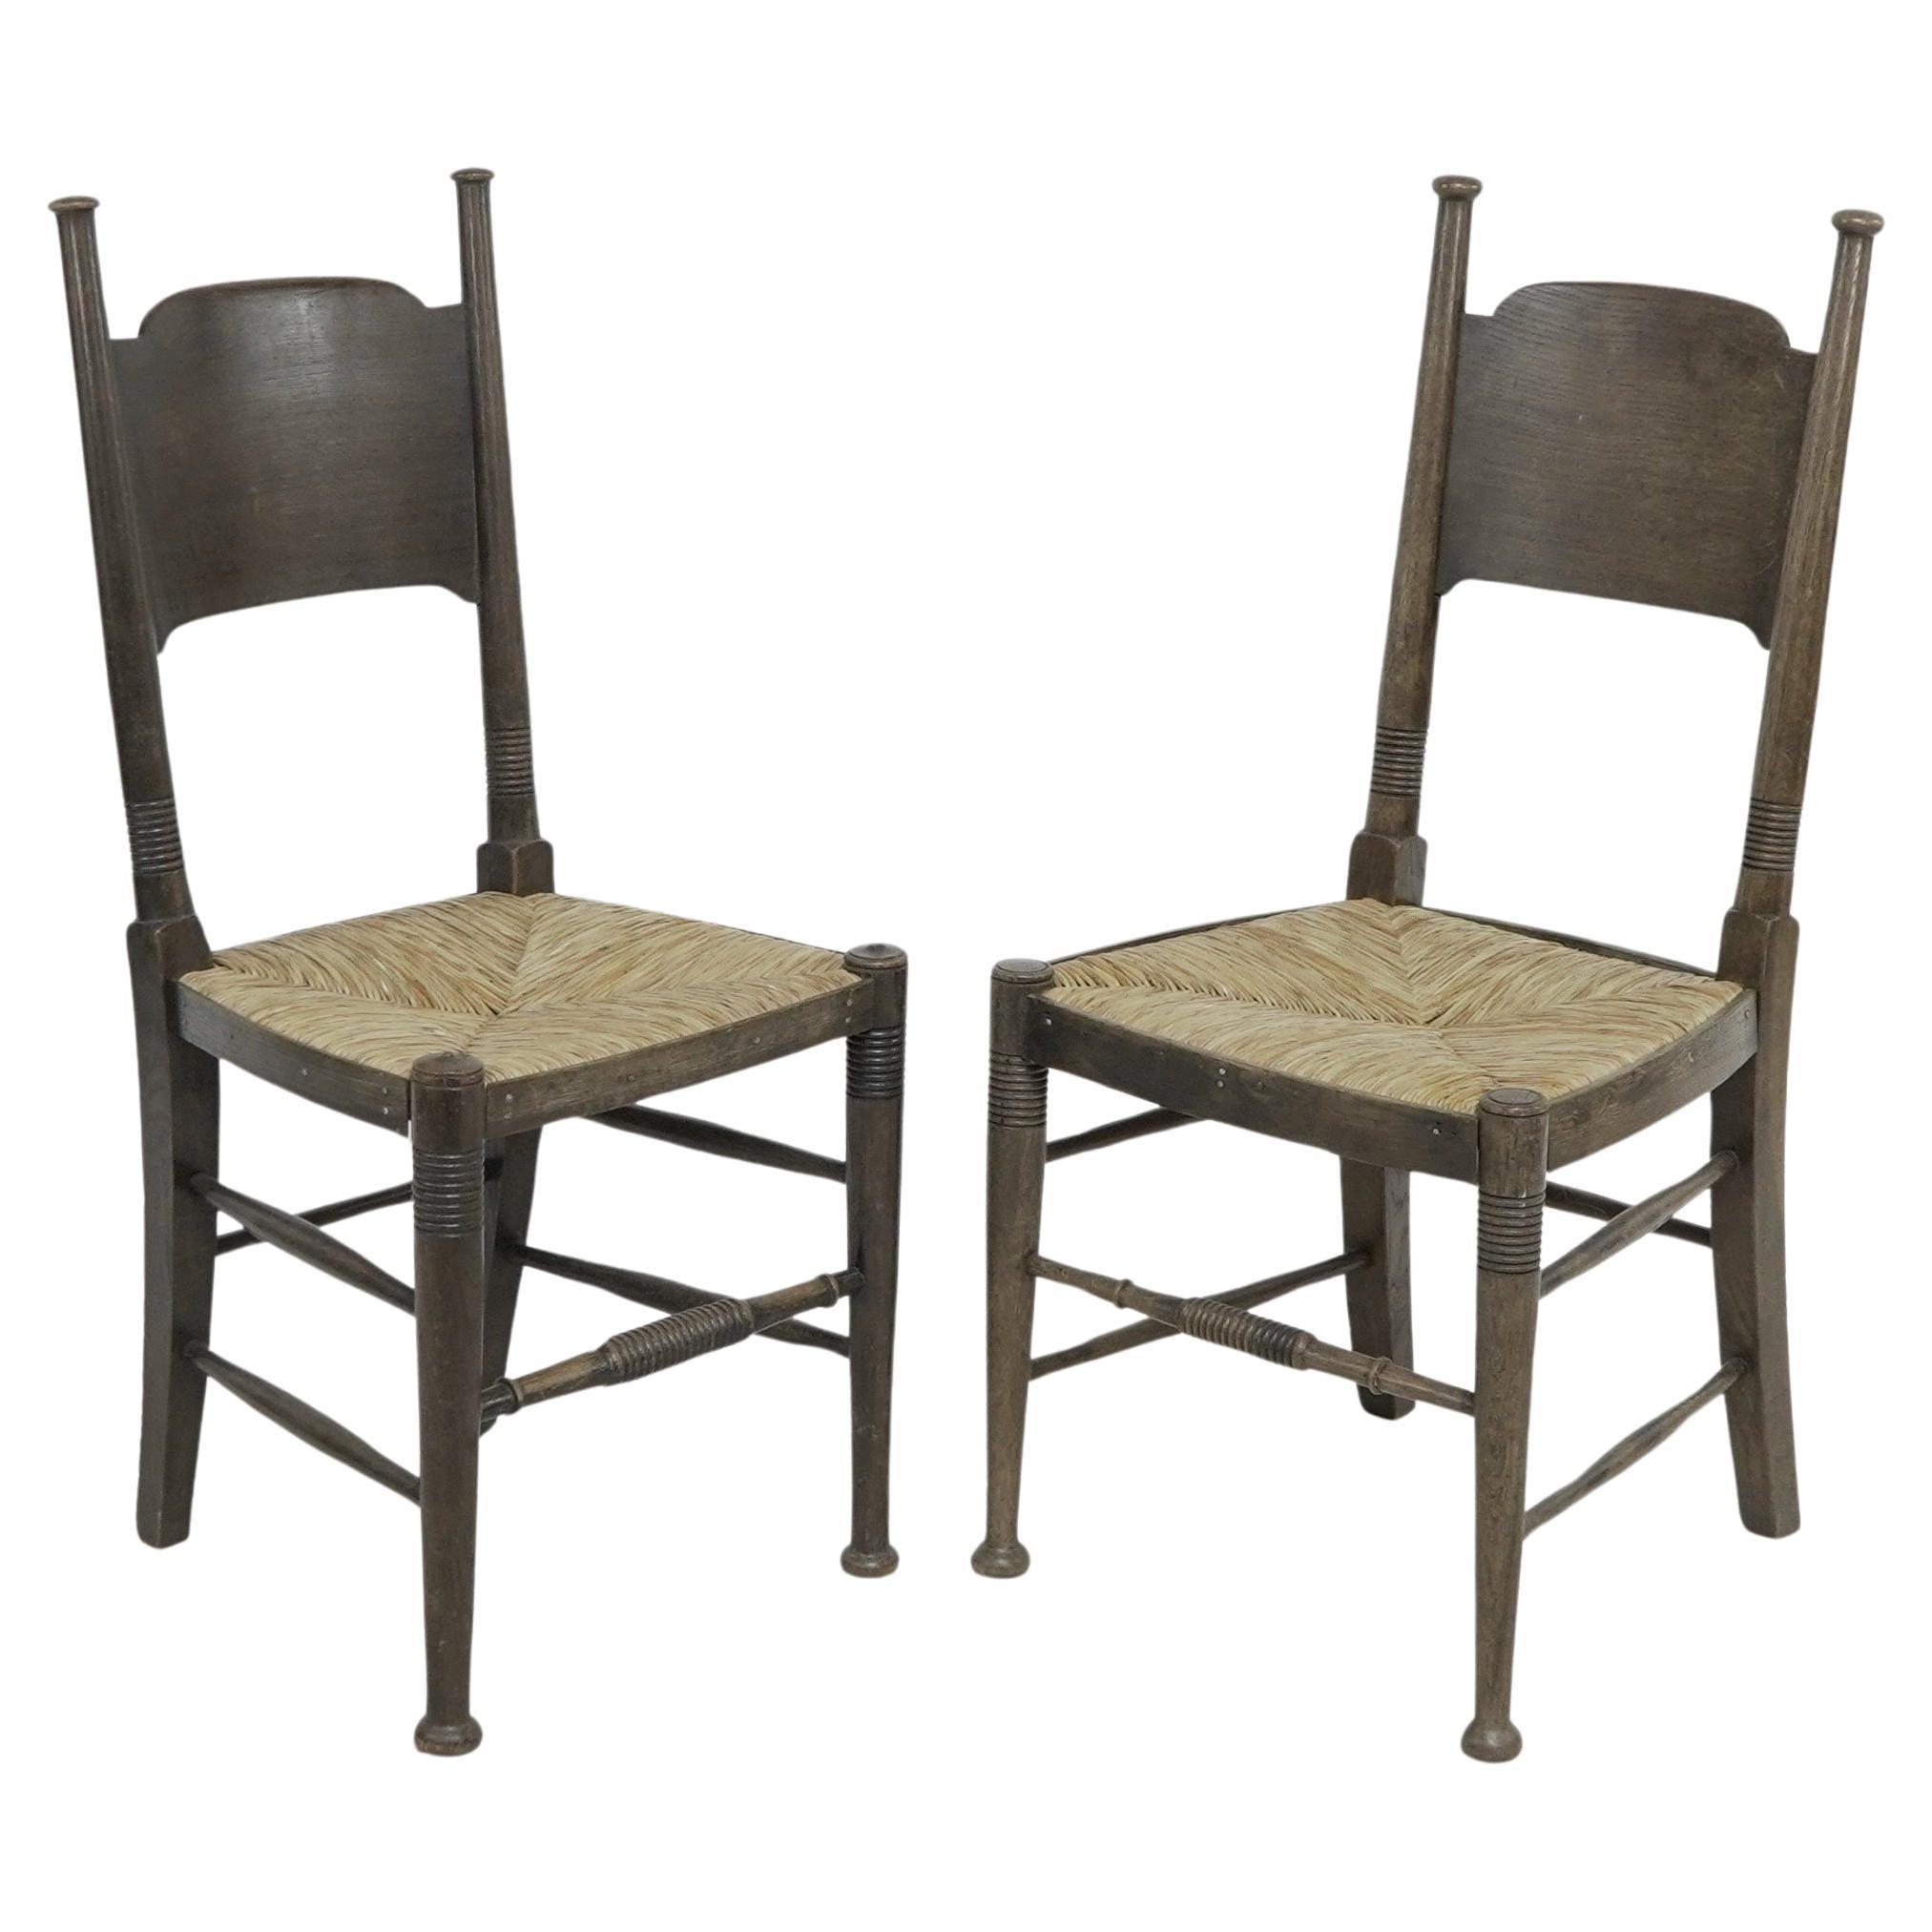 William Birch Dining Room Chairs